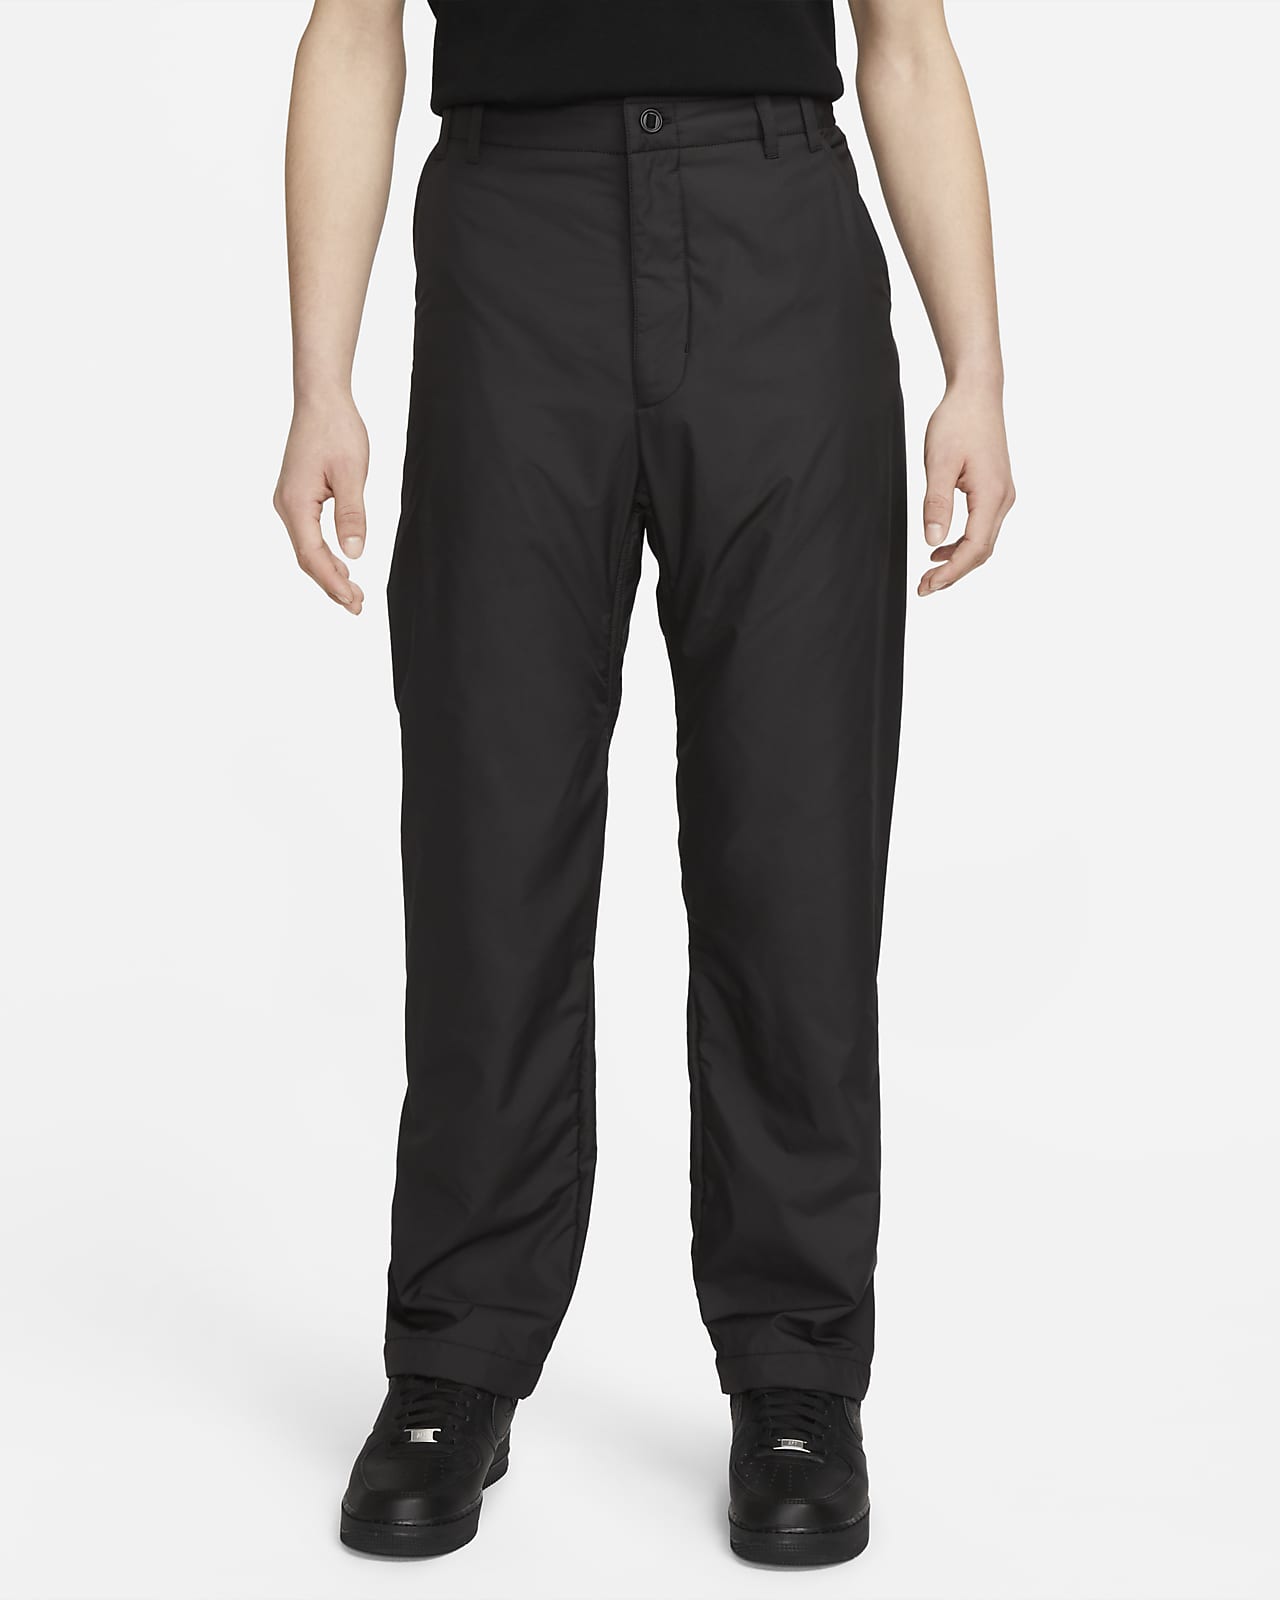 Nike Sportswear Every Stitch Considered Men's Woven Pants